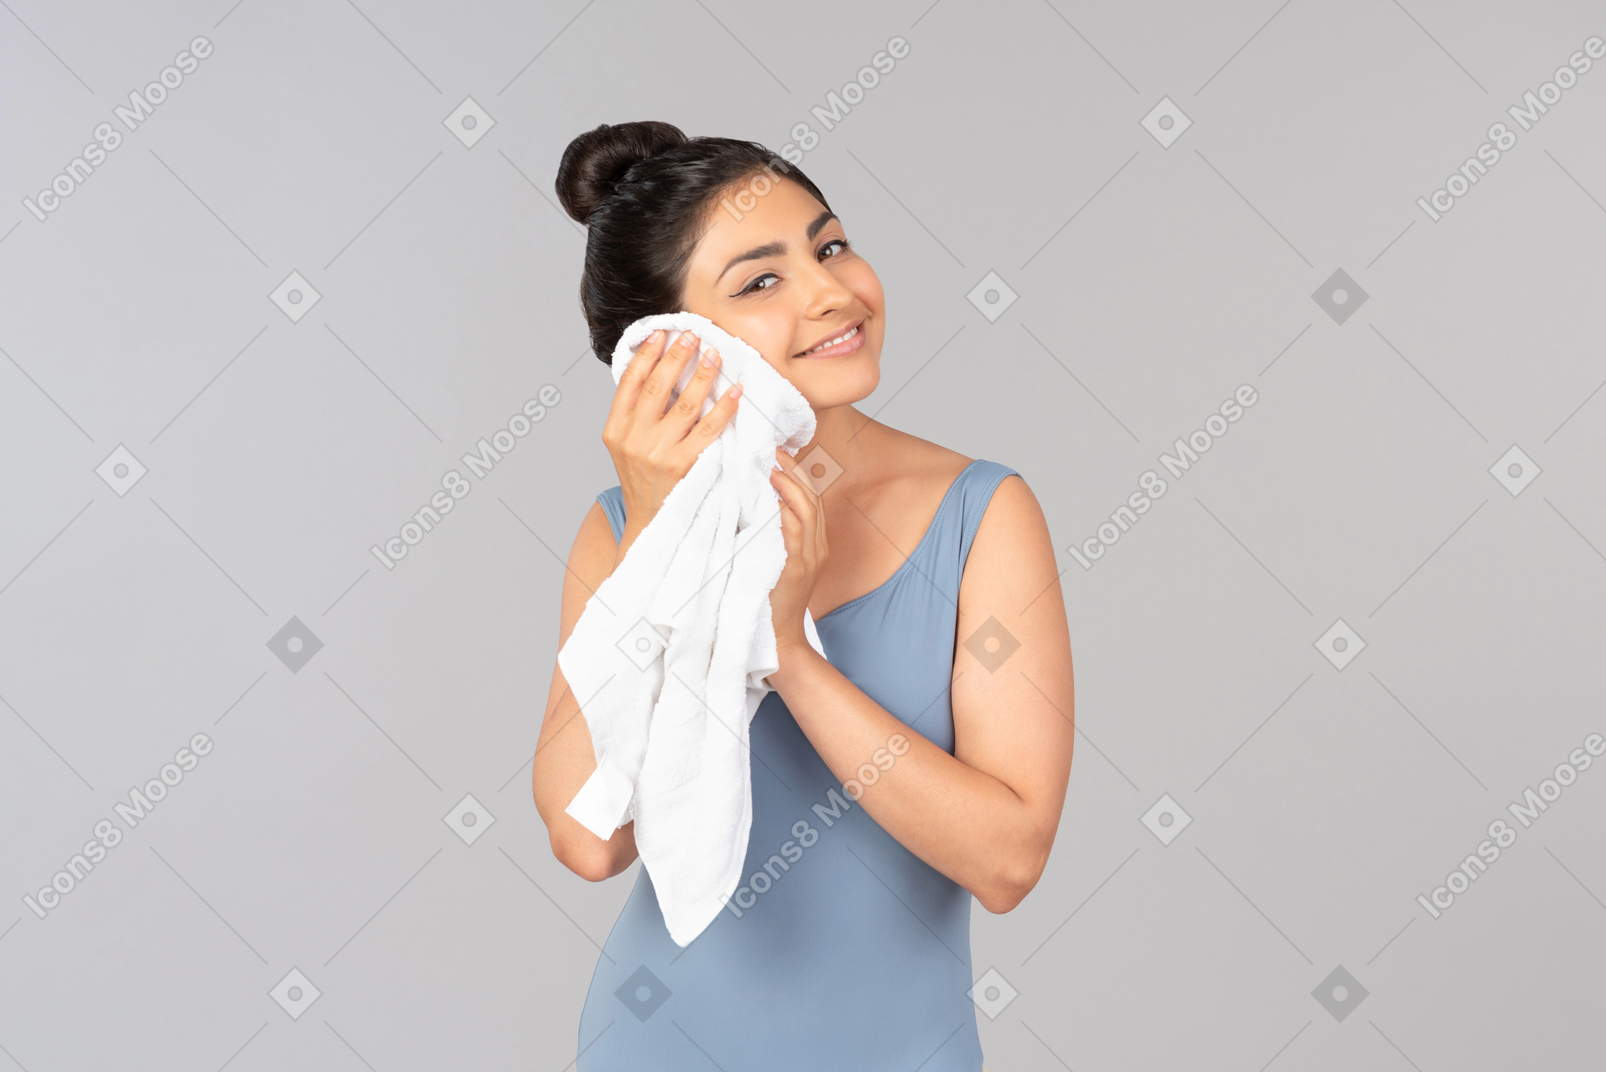 Smiling young indian woman wiping face with his towel